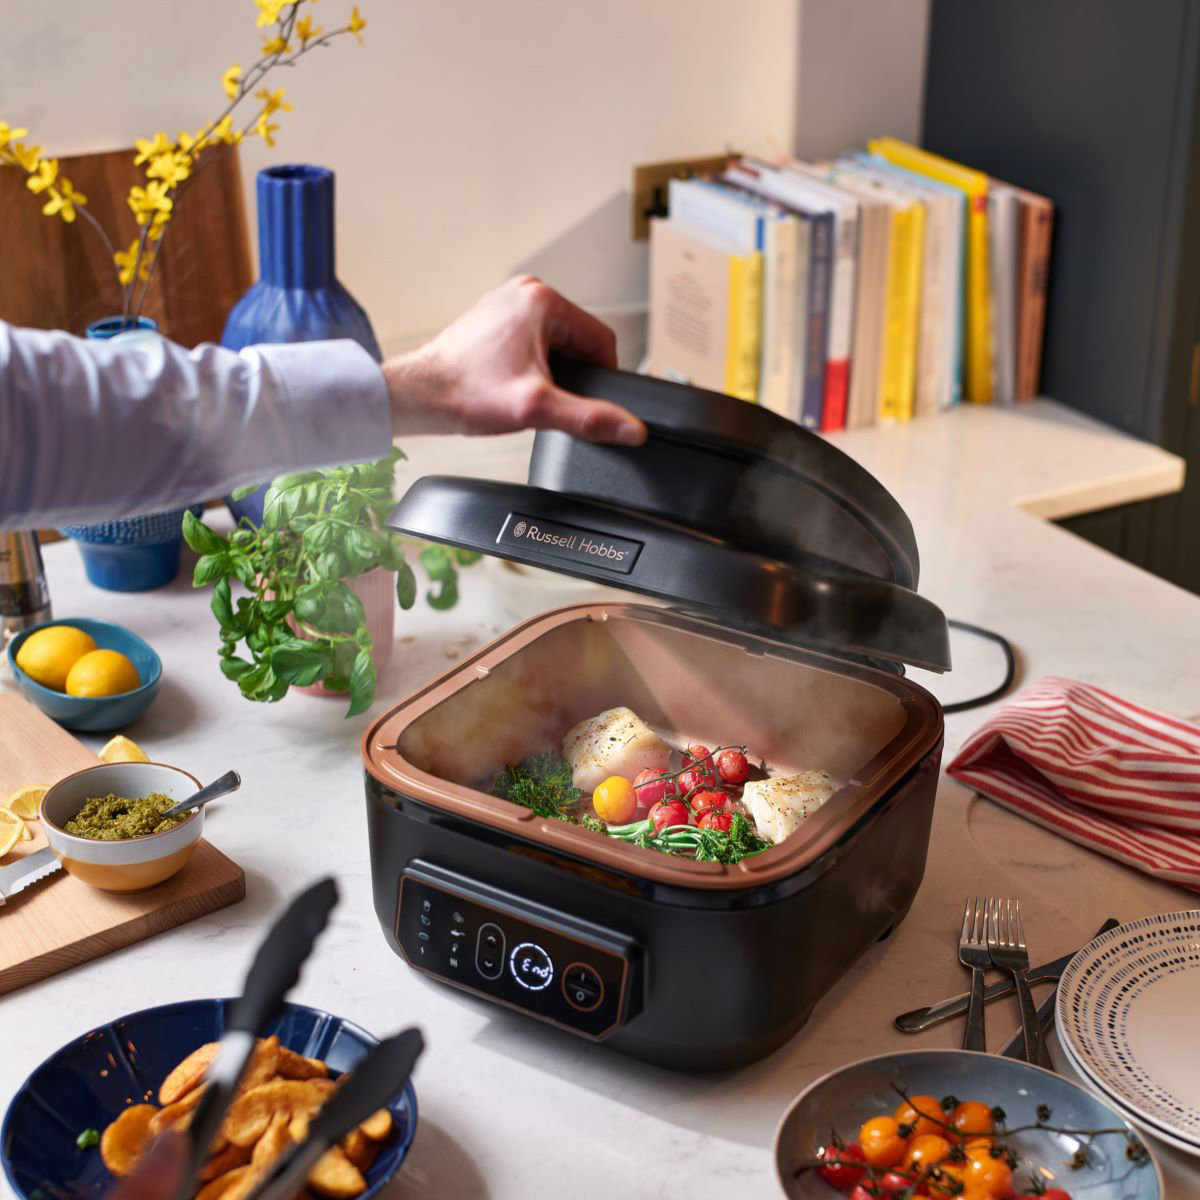 Masters all disciplines: "SatisFry Air & Grill" multicooker from Russell Hobbs.